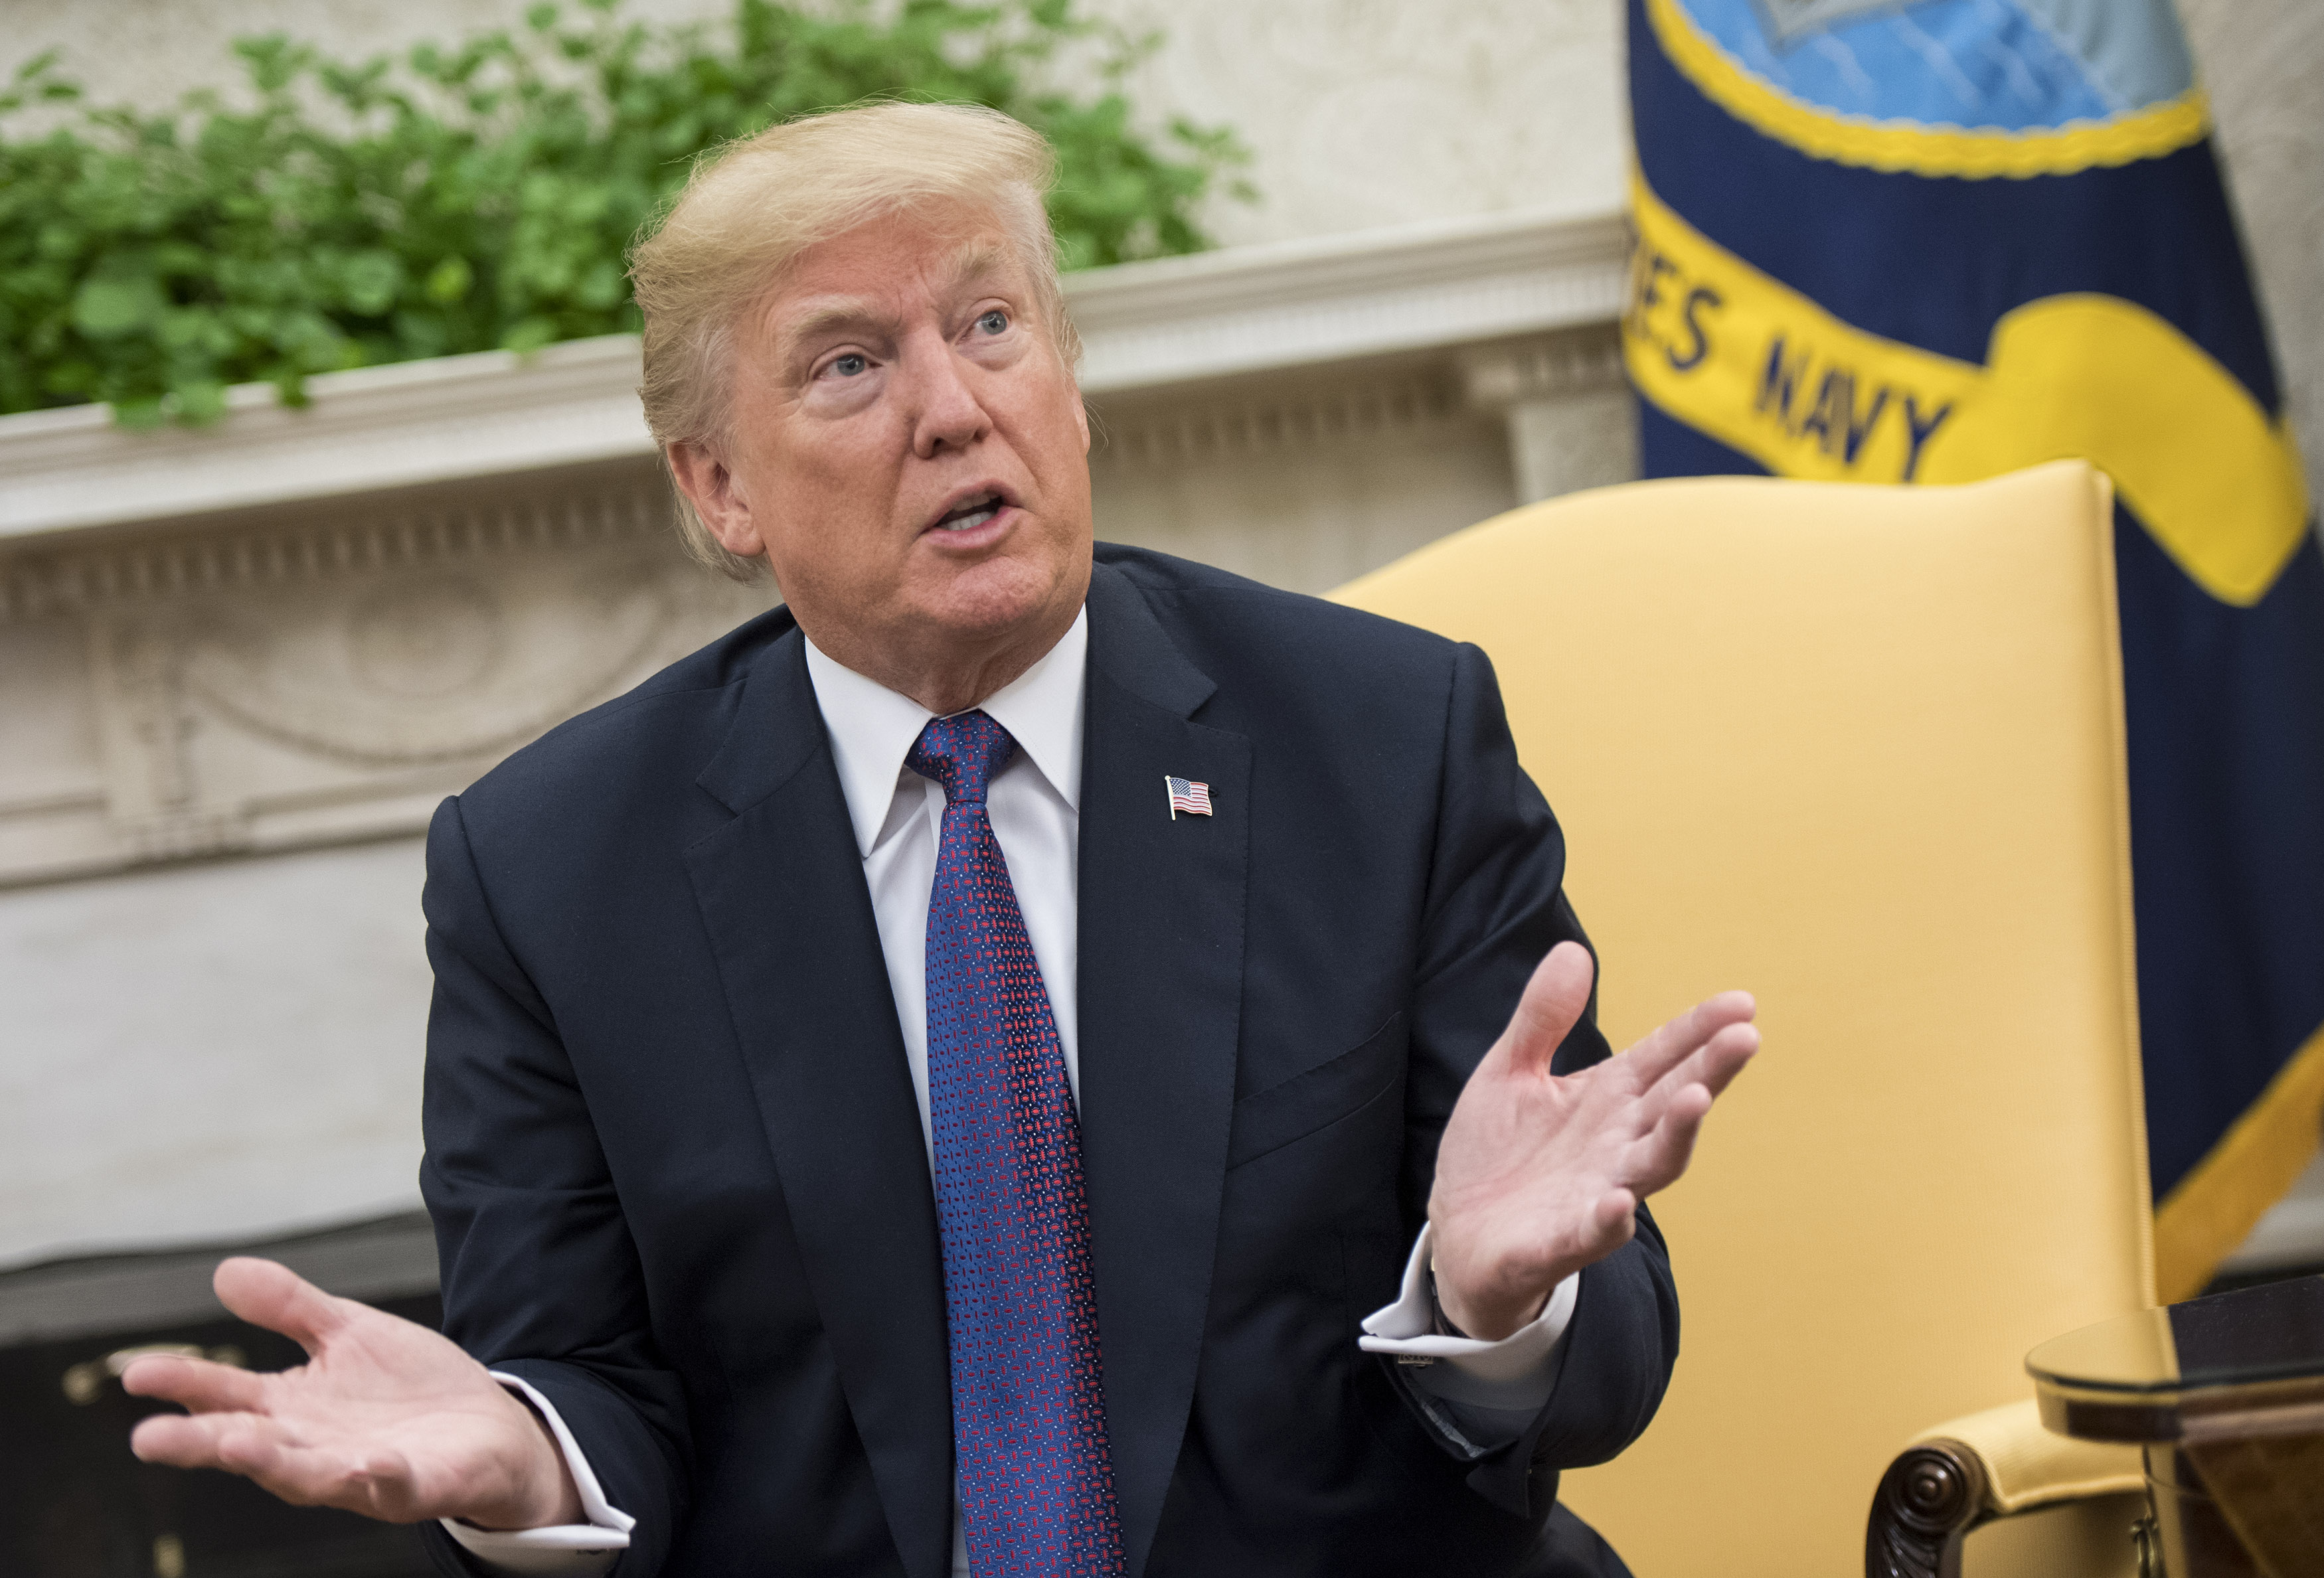 President Donald Trump speaks to the media during a meeting with Governor Ricardo Rossello of Puerto Rico in the Oval Office at the White House on October 19, 2017 in Washington, D.C. (Kevin Dietsch/Pool—Getty Images)